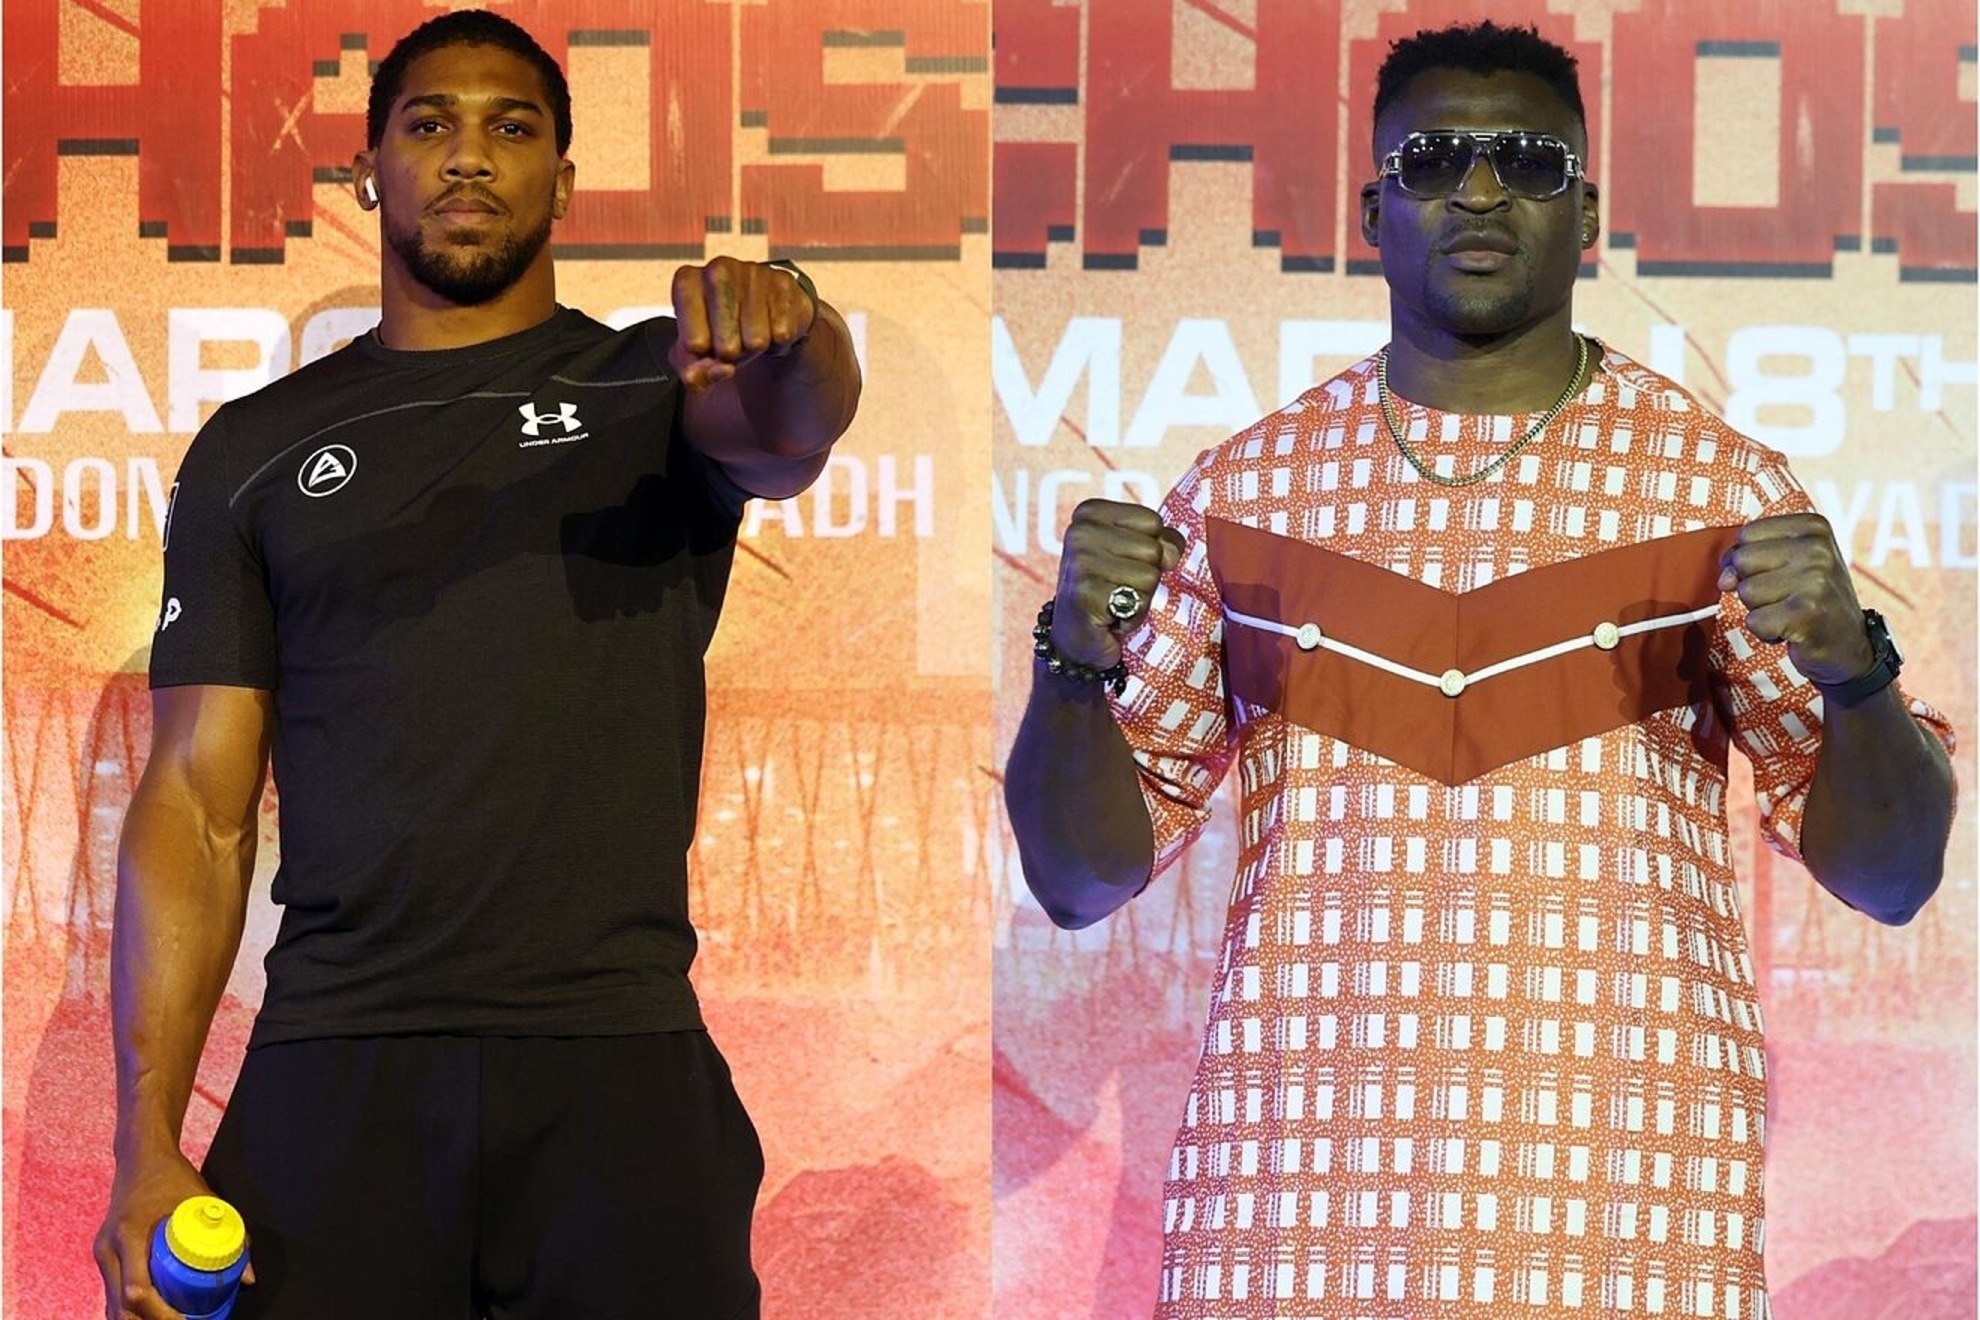 Joshua vs Ngannou Purse: How much will the winner of the fight earn?